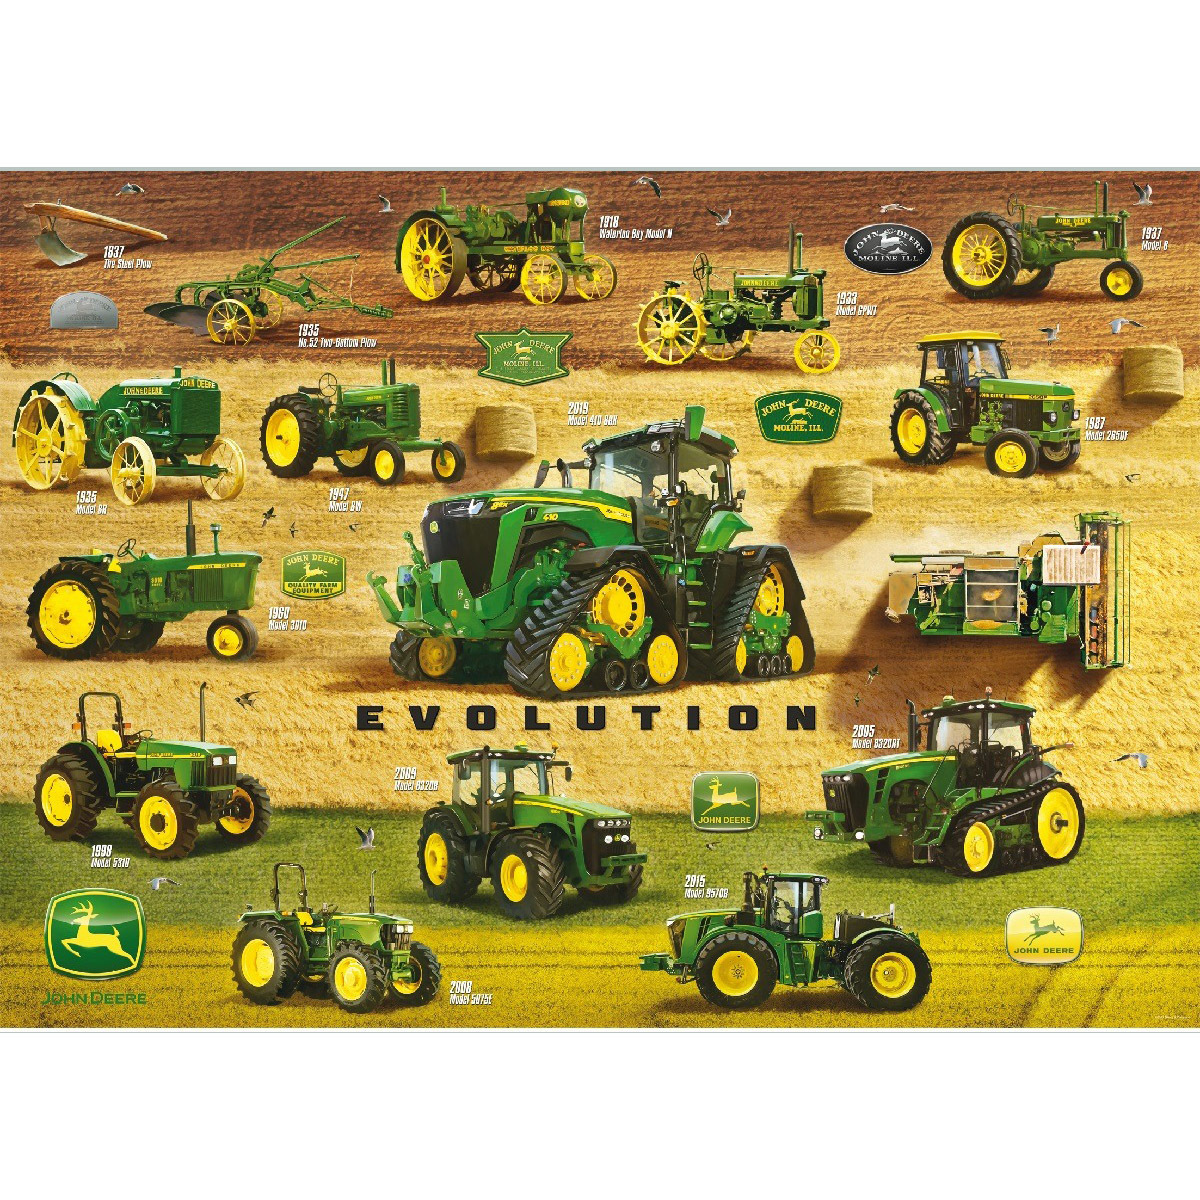 1000 Piece Evolution of the Tractor Puzzle